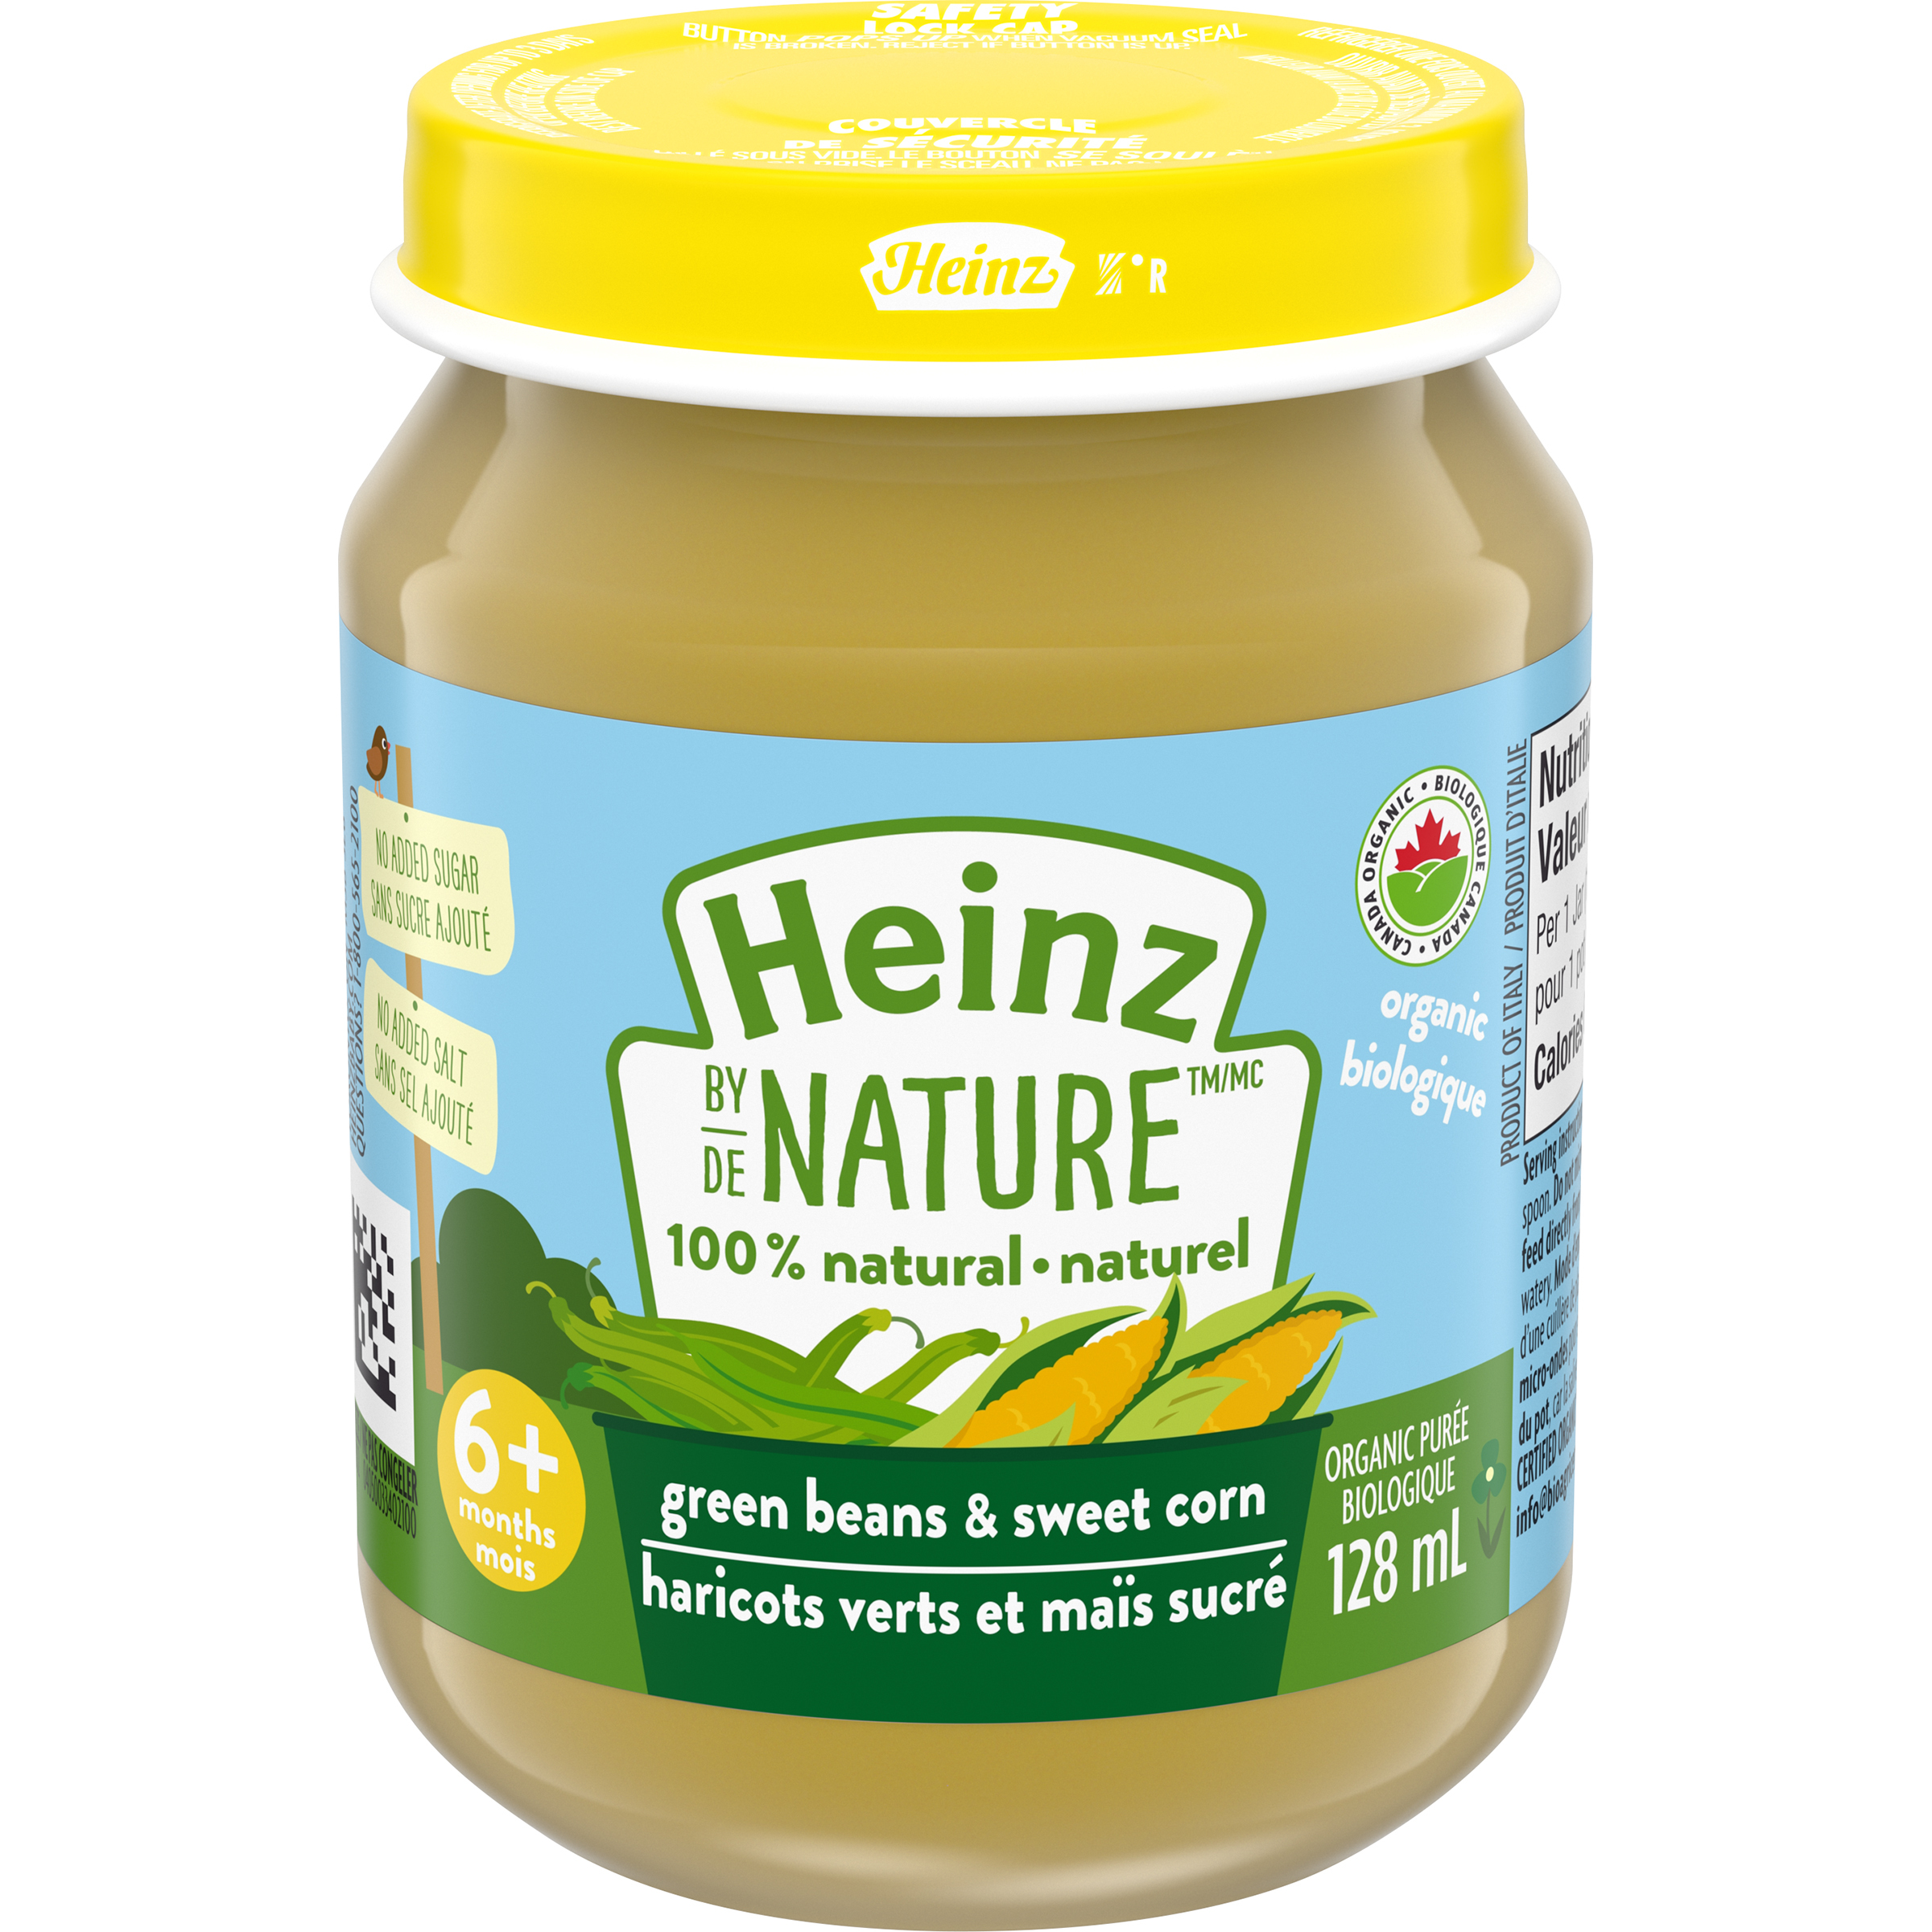 Heinz by Nature 100% Natural Baby Food - Organic Green Beans & Sweet Corn Purée